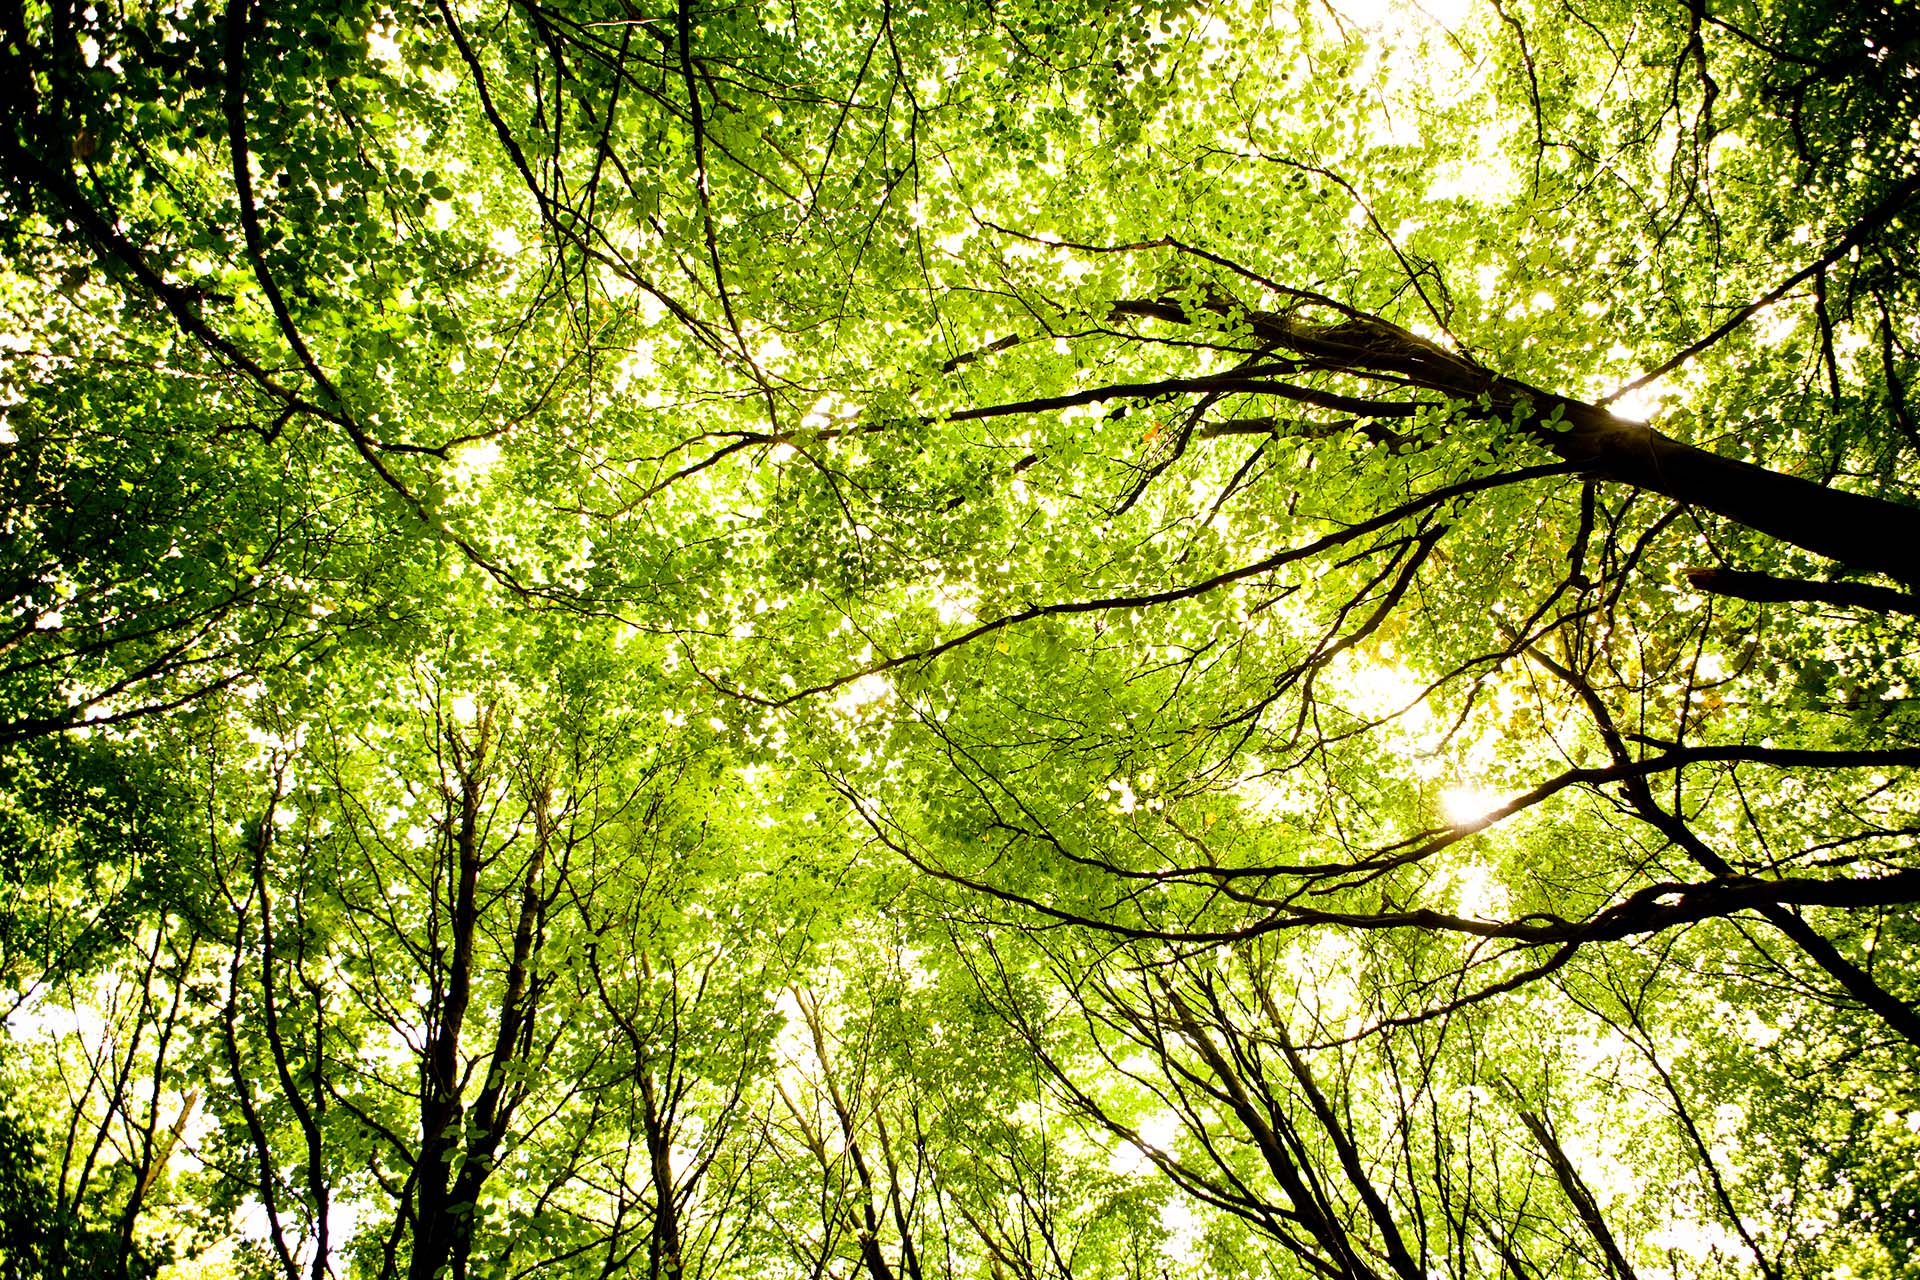 Image of tree tops with bright green leaves